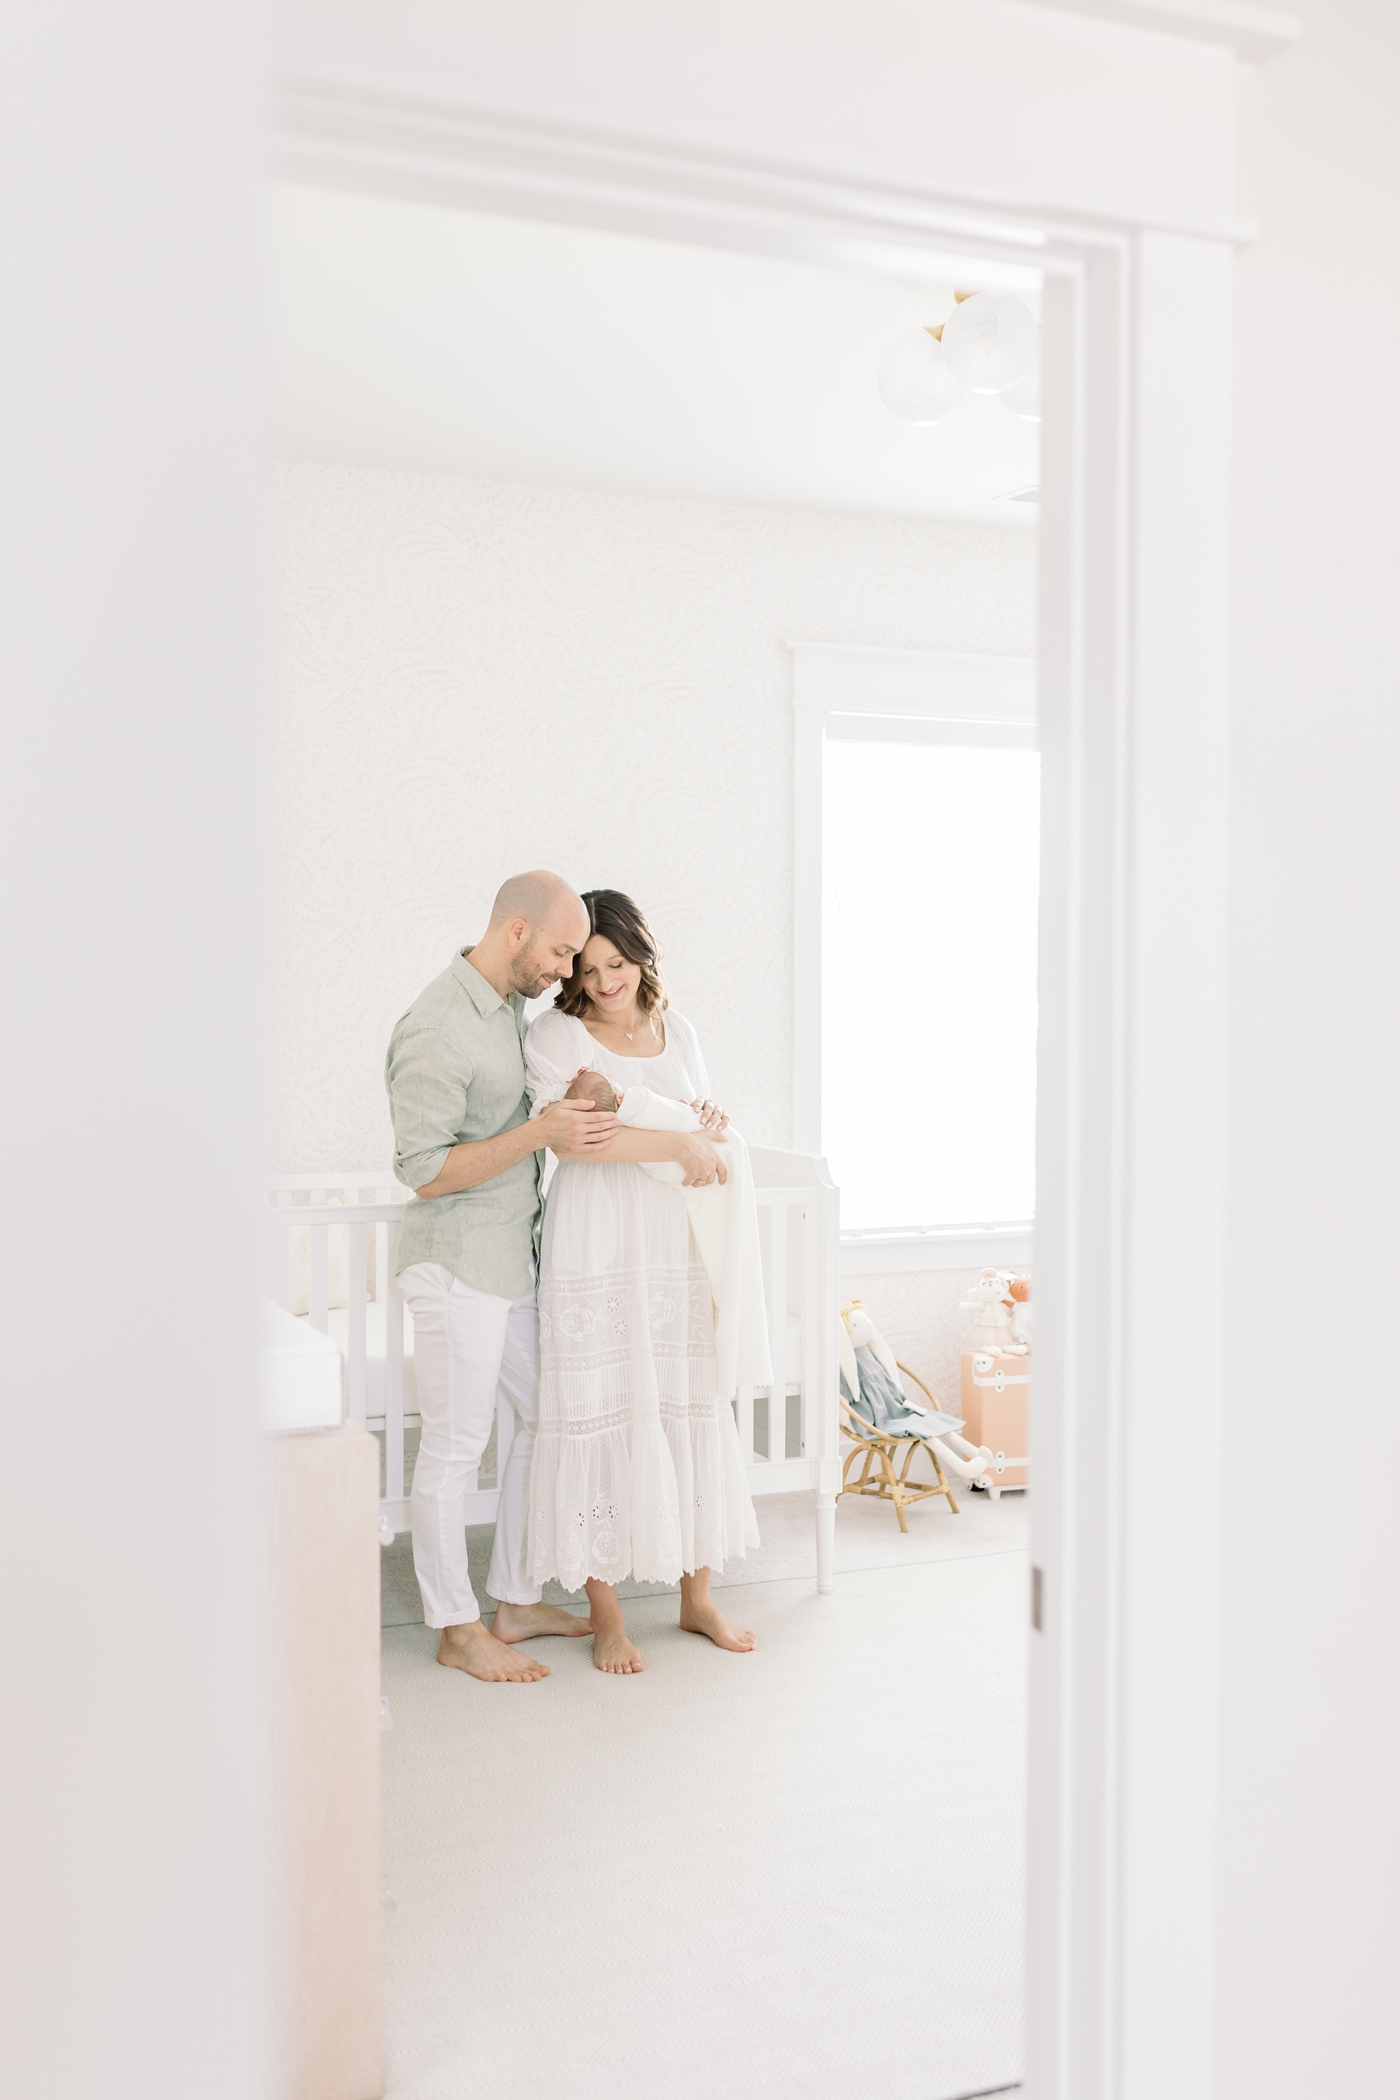 Mom and dad holding their new baby in the nursery during their lifestyle newborn session | Photo by Caitlyn Motycka Photography